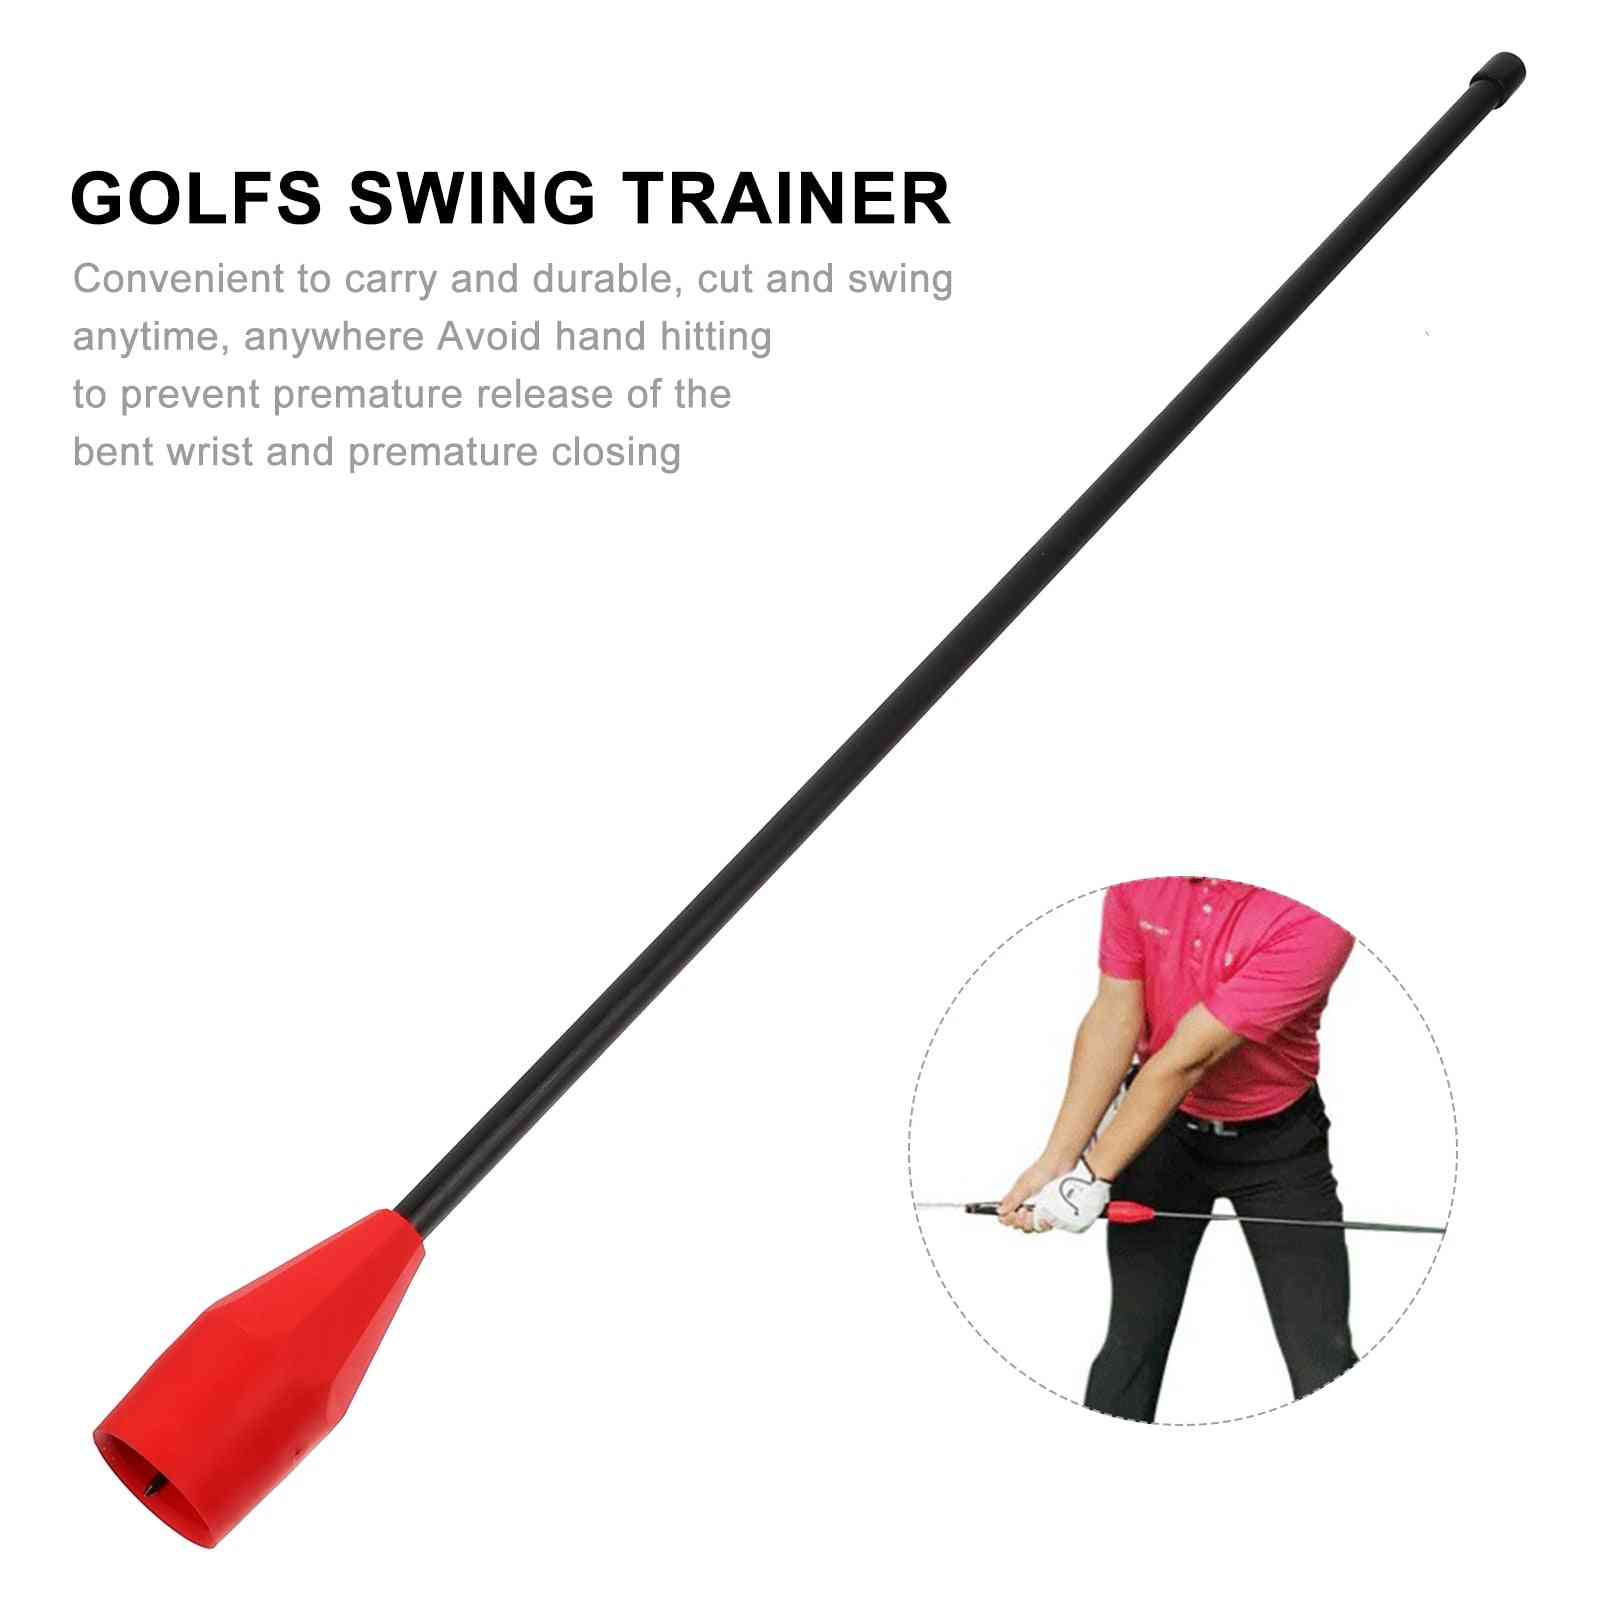 Outdoors Golfs Training Aids, Swing Trainer Golf Accessories